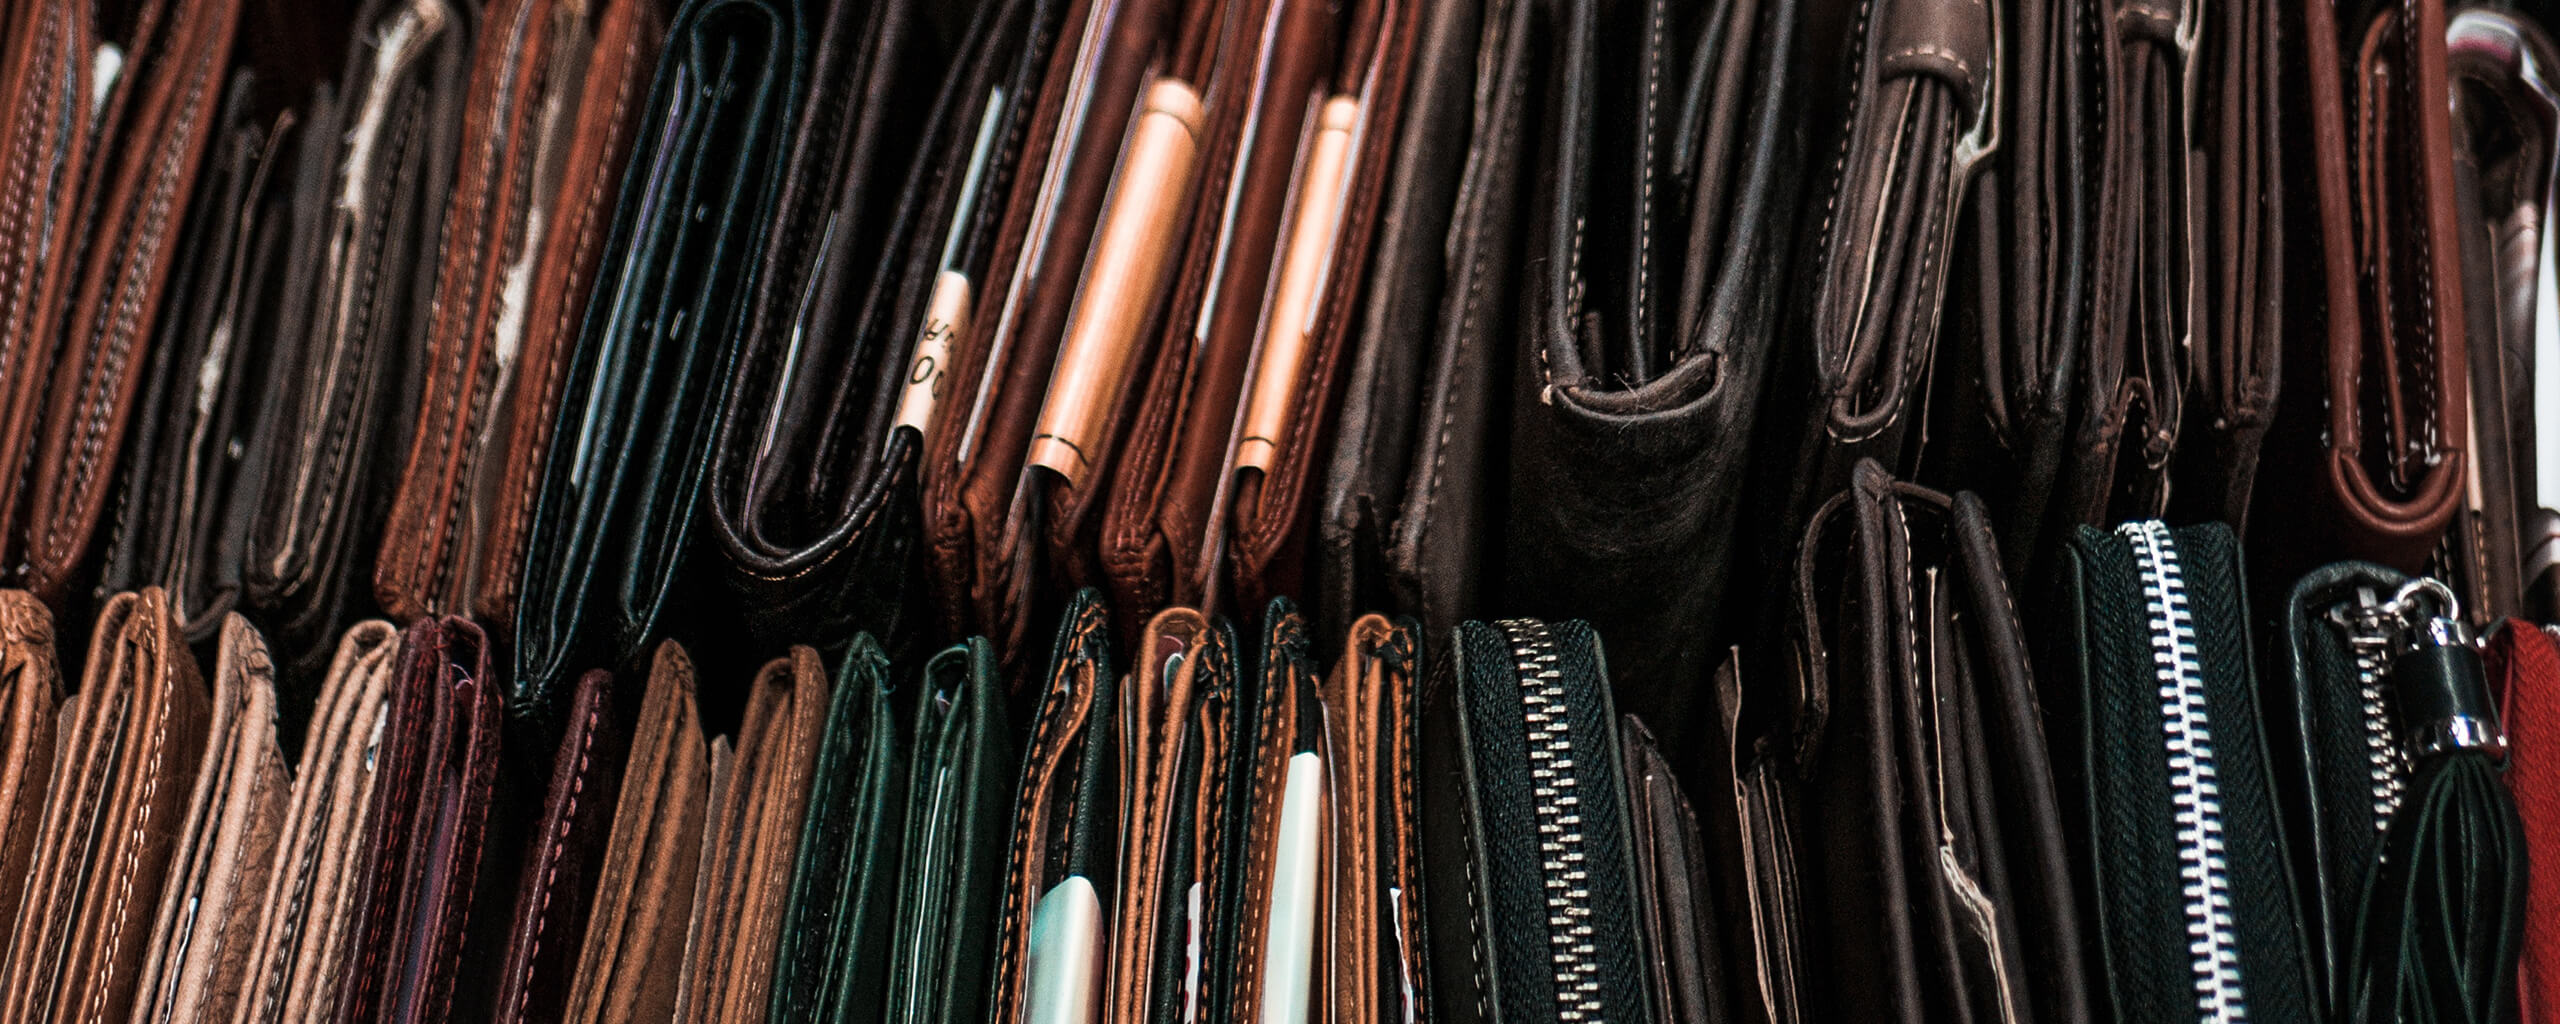 many wallets on 2 rows